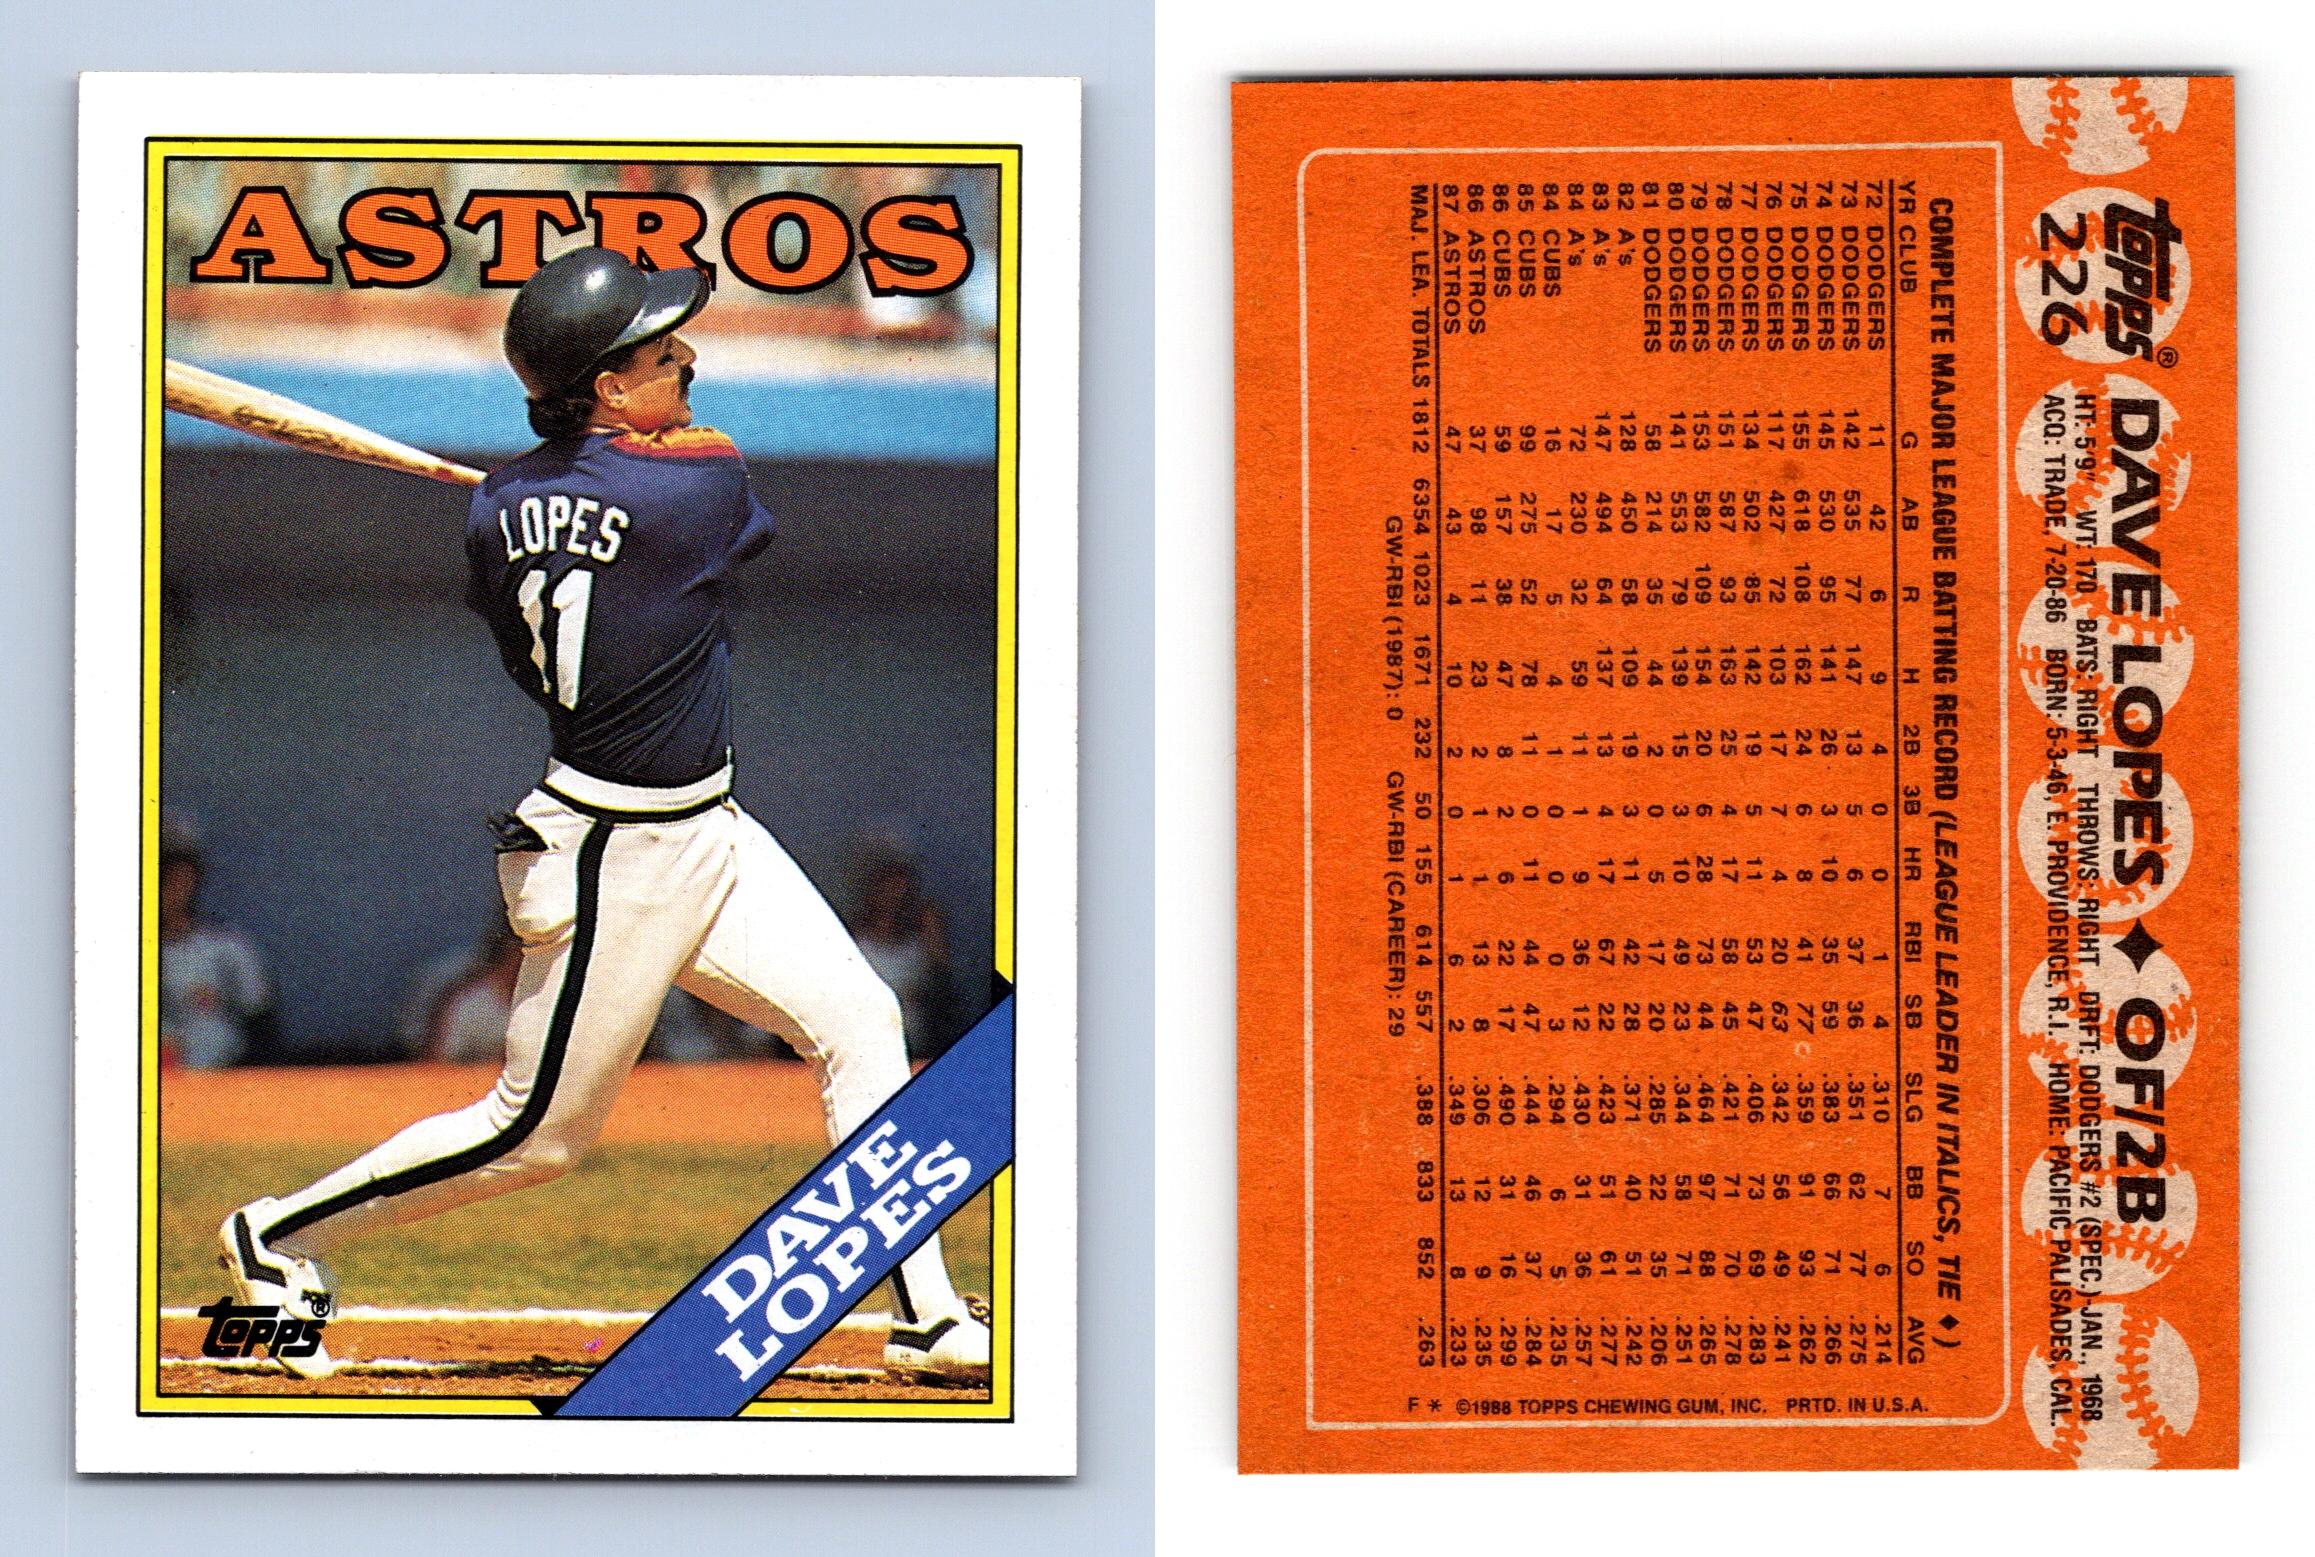 1977 Topps Dave Lopes